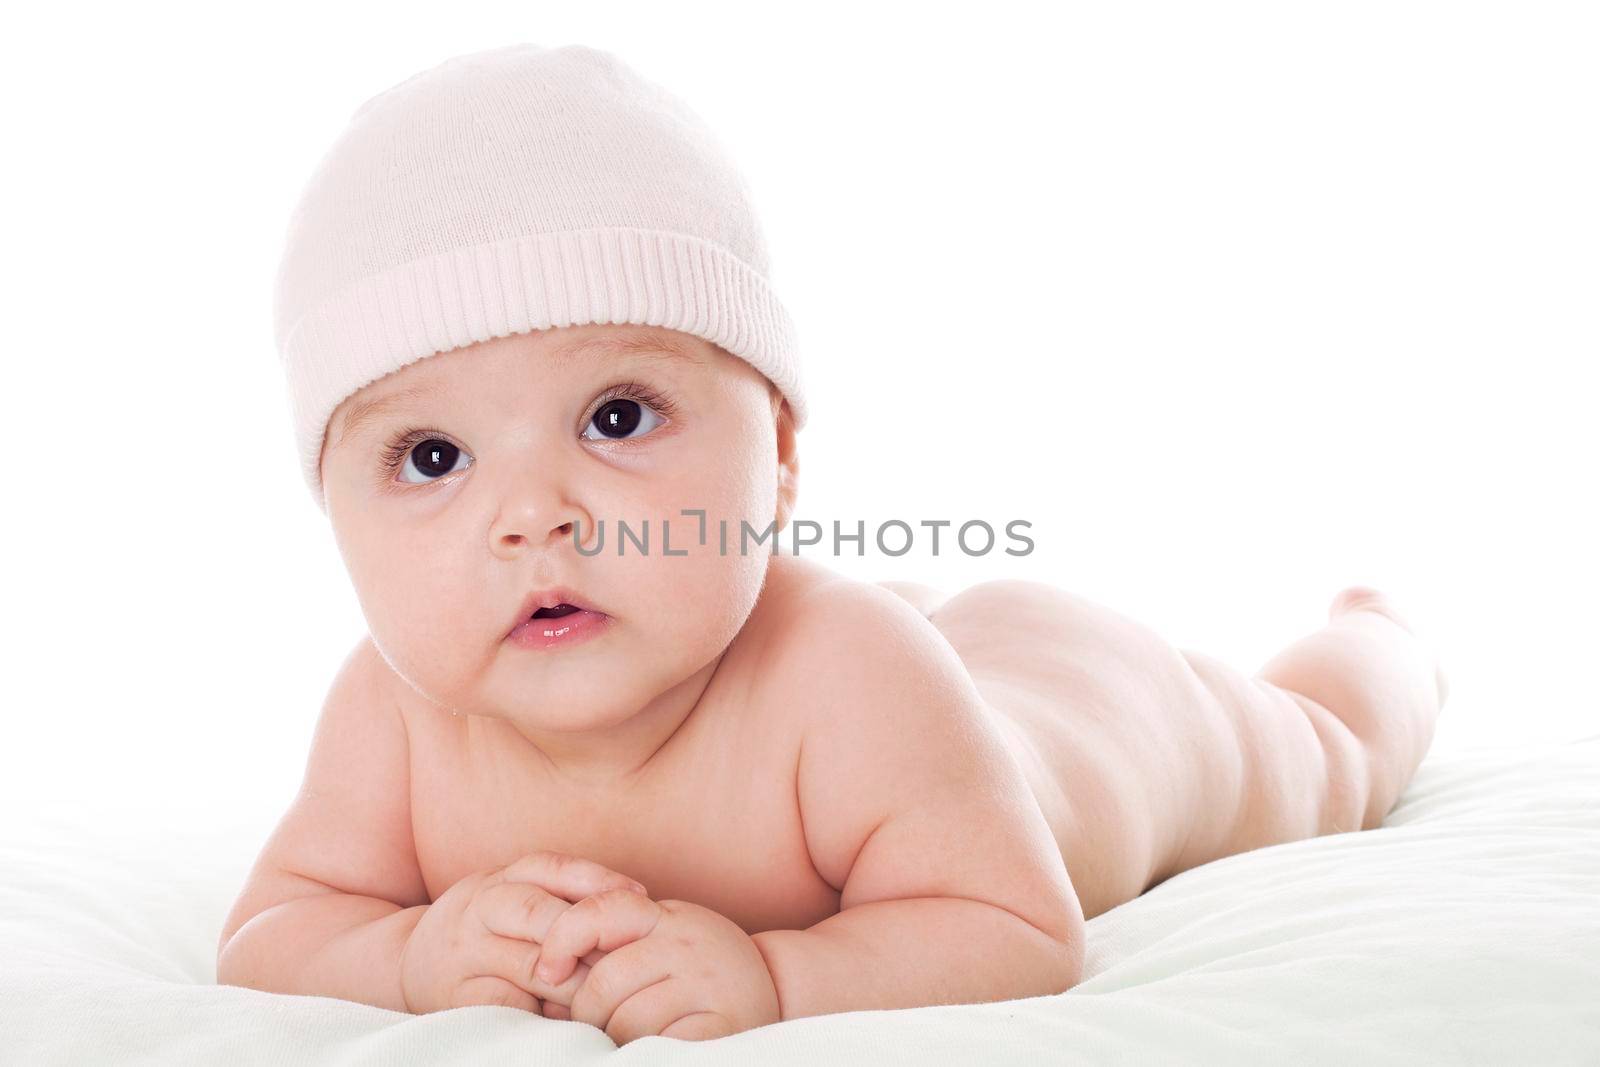 Cute baby lying on stomach on white floor background, wearing a cap and looking up being greatly surprising.